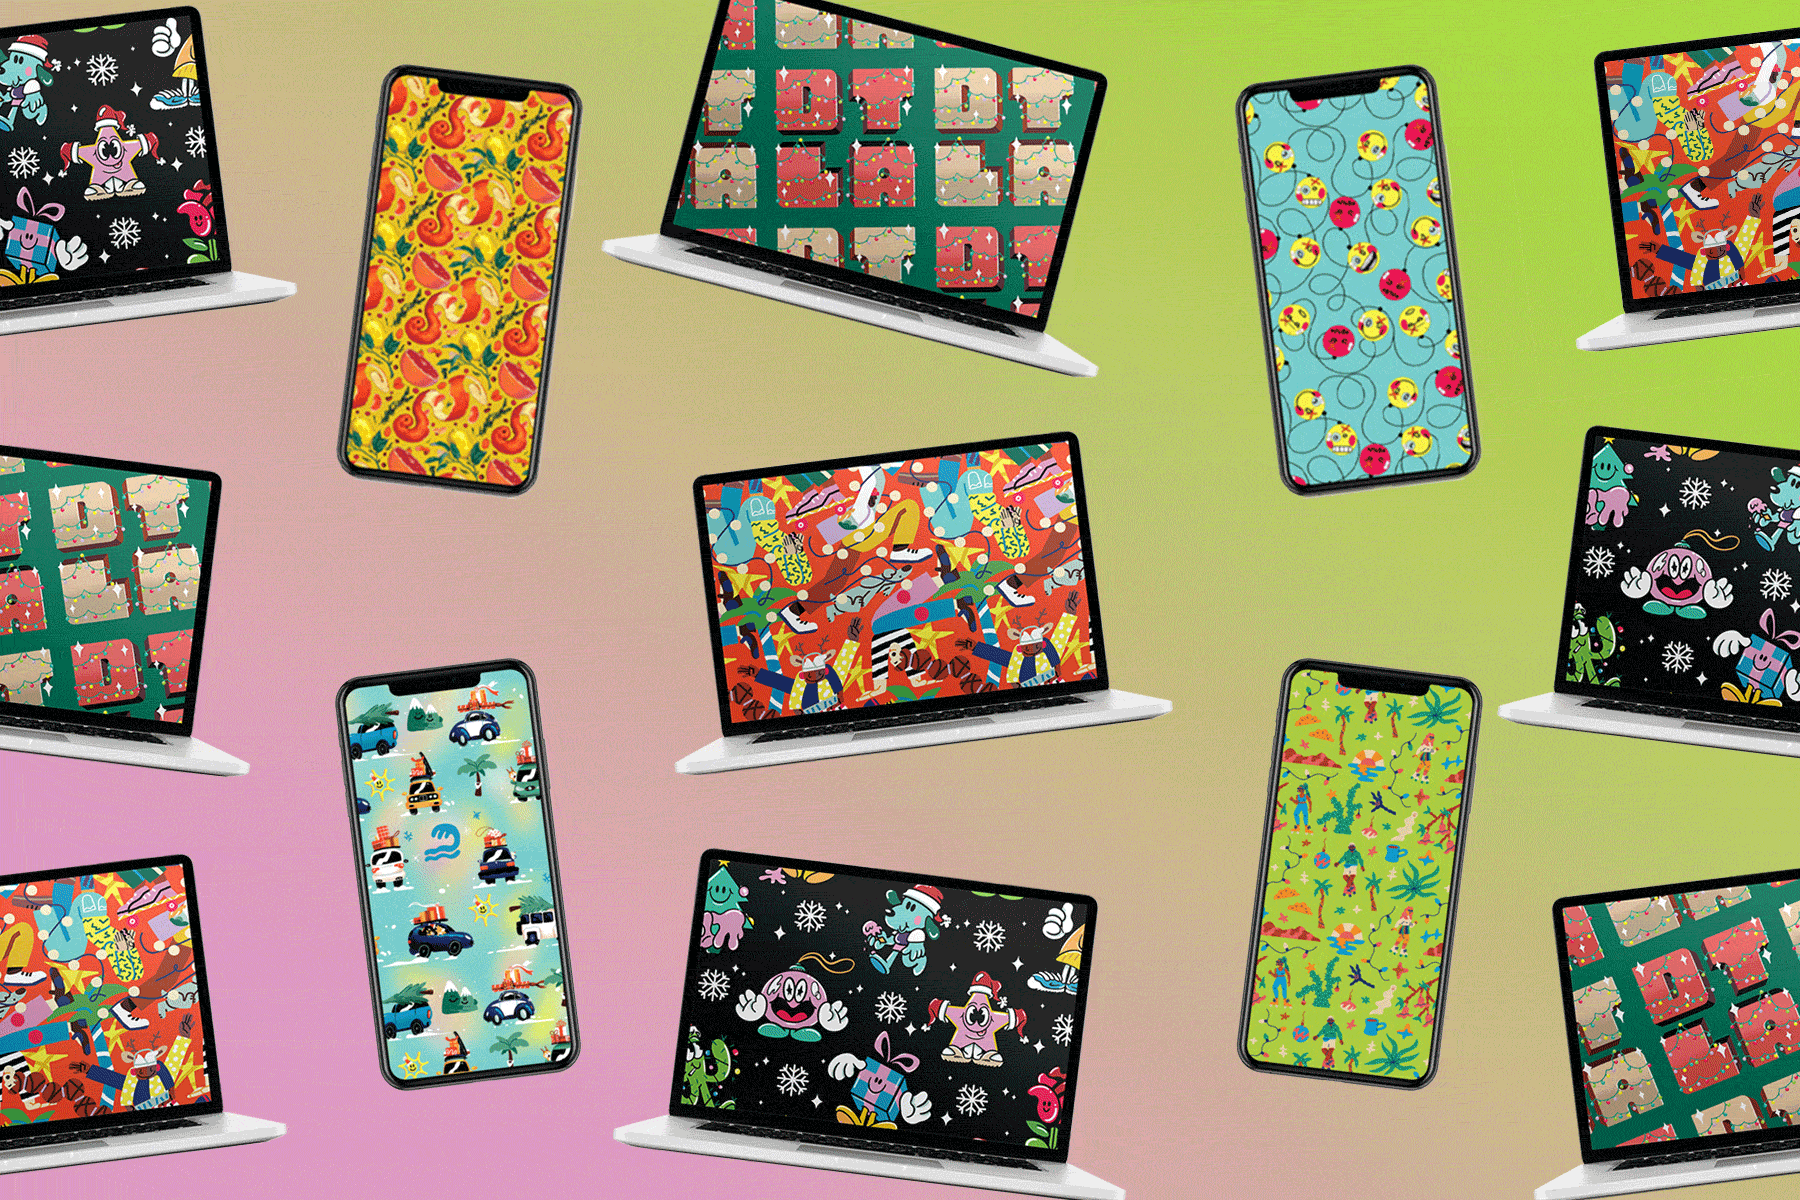 Grid of phones and laptops with various festive backgrounds